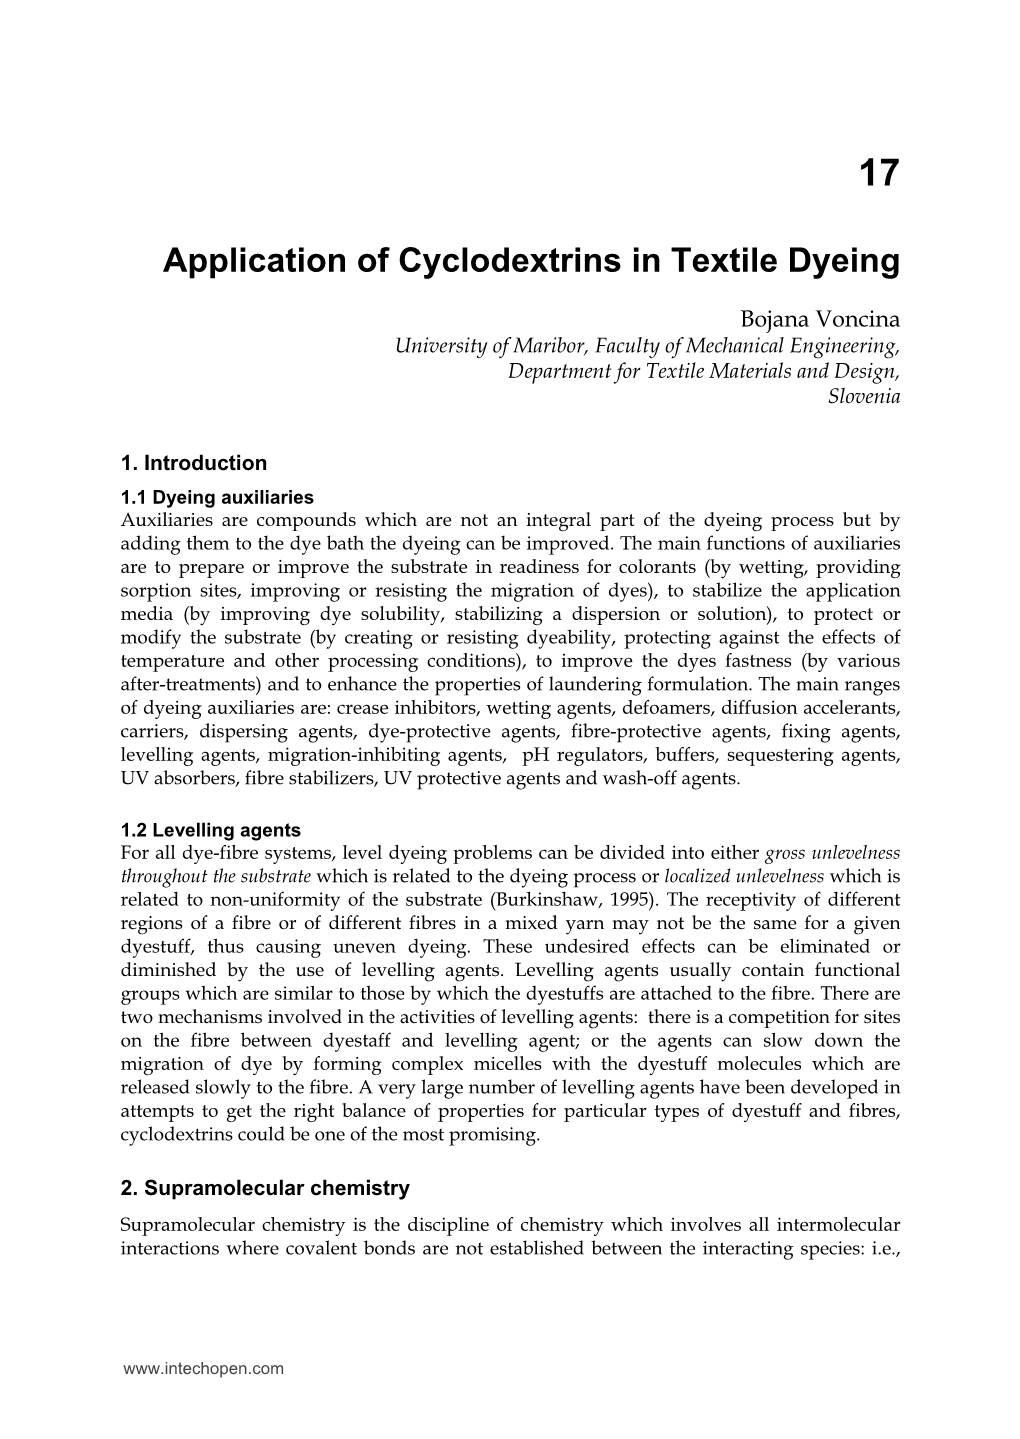 Application of Cyclodextrins in Textile Dyeing